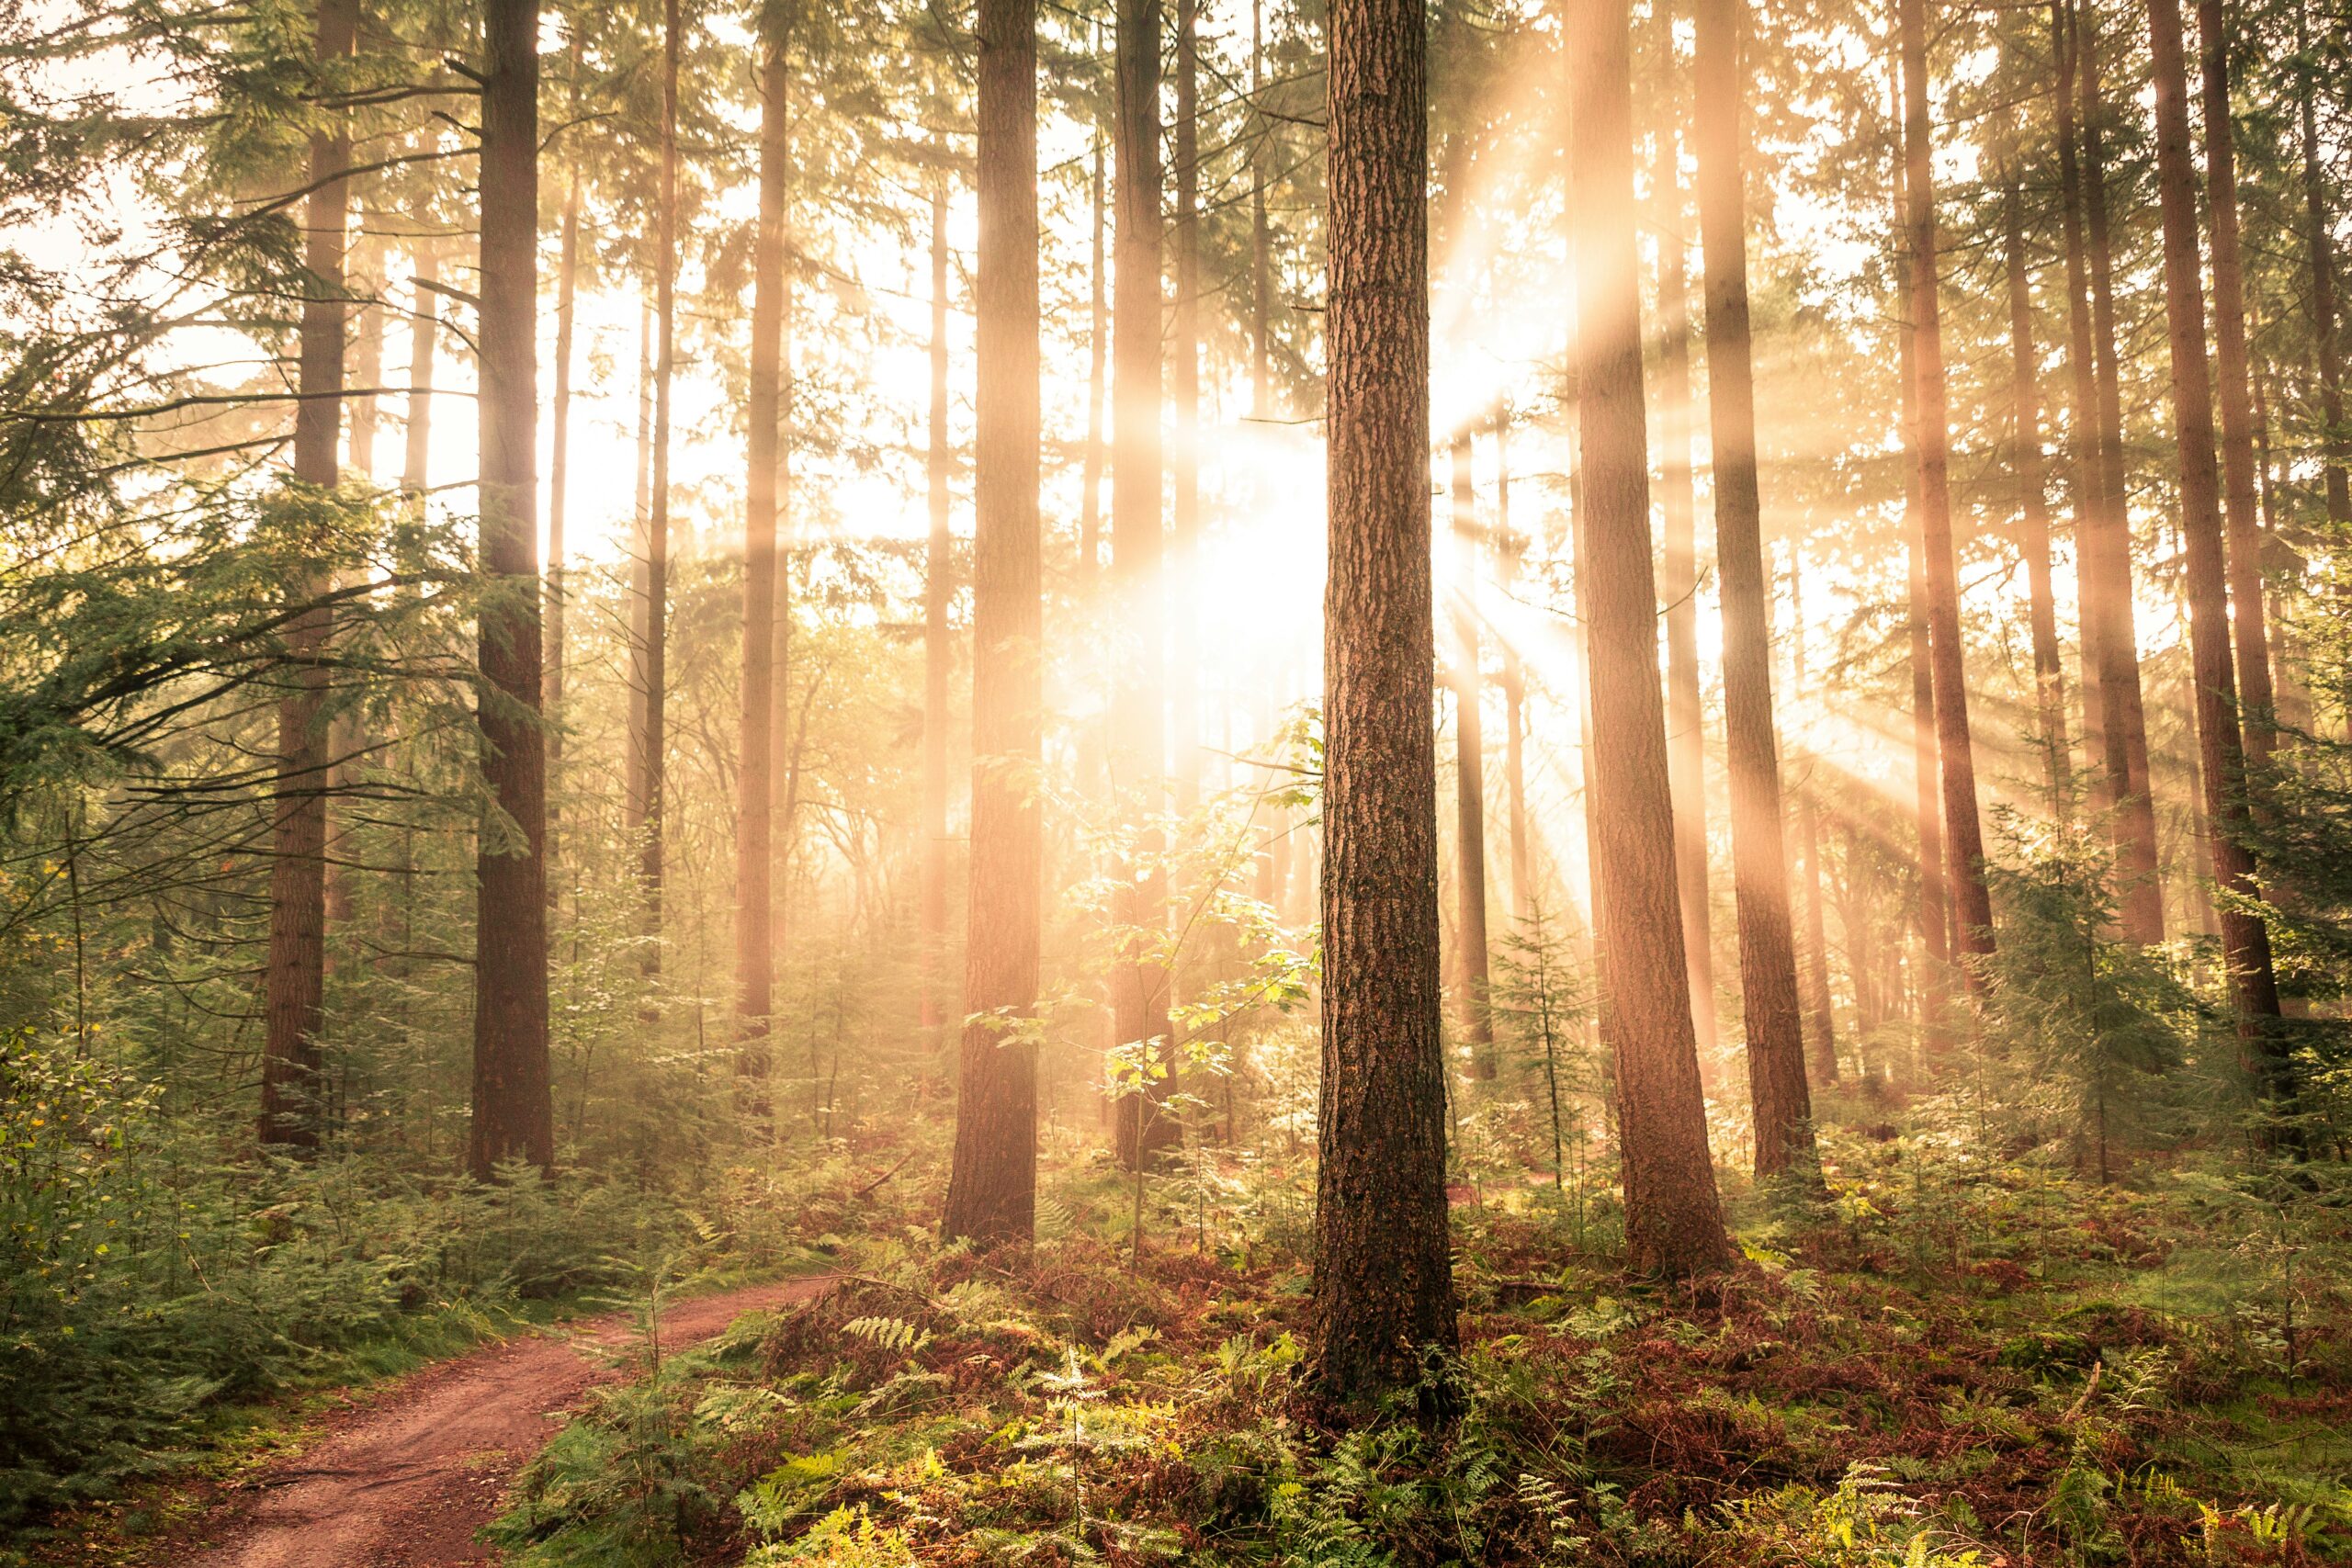 Image of a forest with sunlight